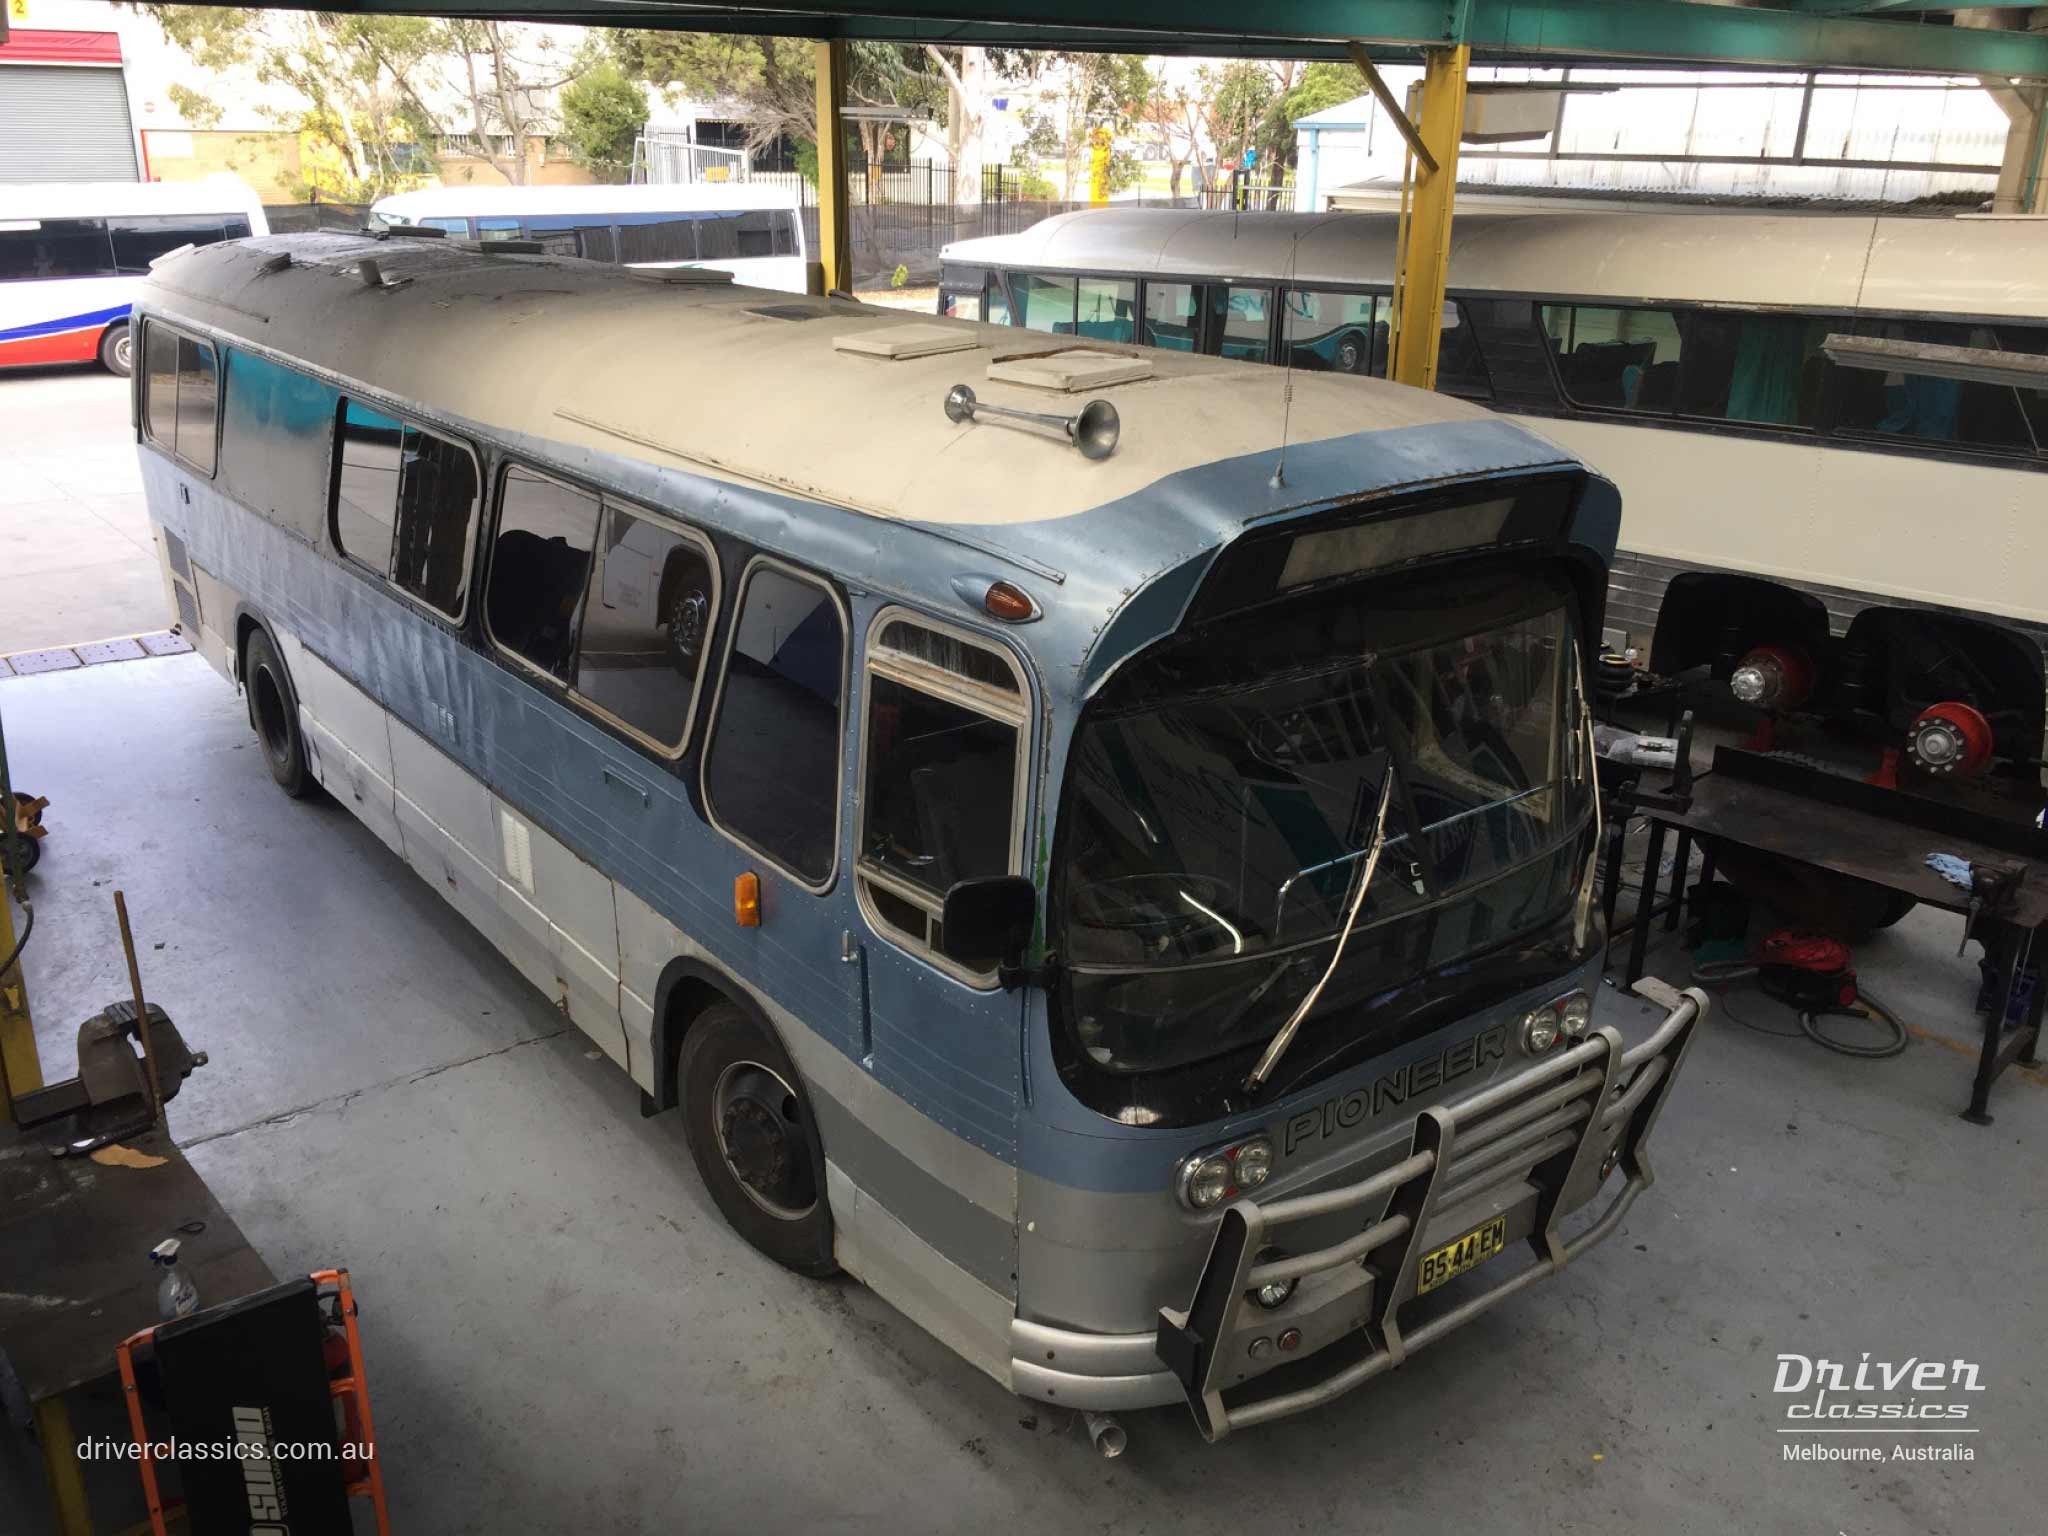 Ansair Scenicruiser bus, GMC 1967 version, from above, in workshop, August 2018